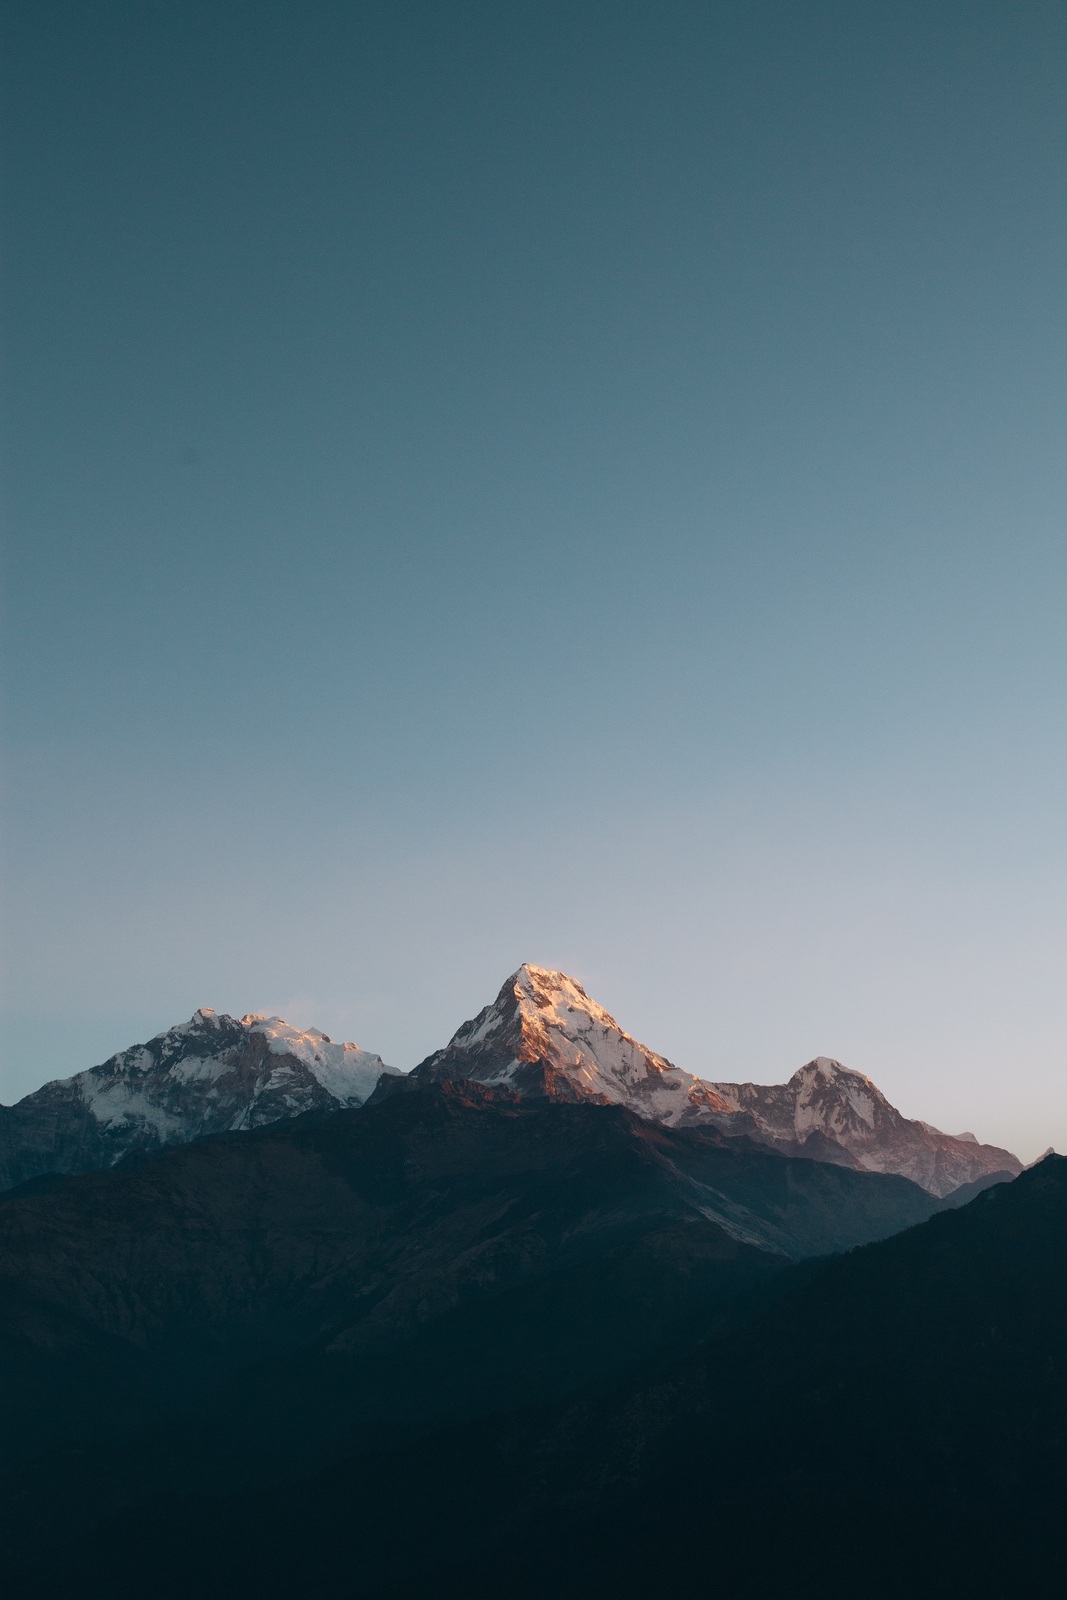 hd iphone wallpapers tumblr #16